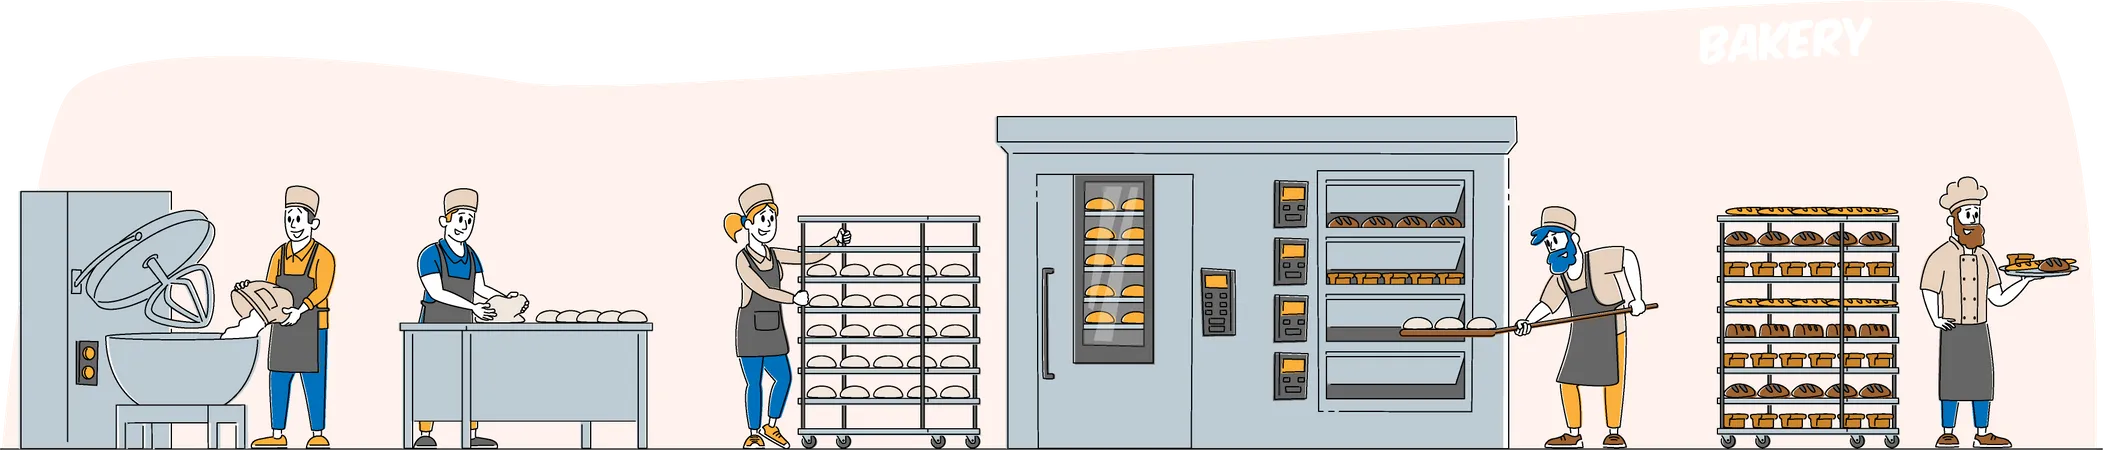 Bakery and Bread Machinery Production Illustration